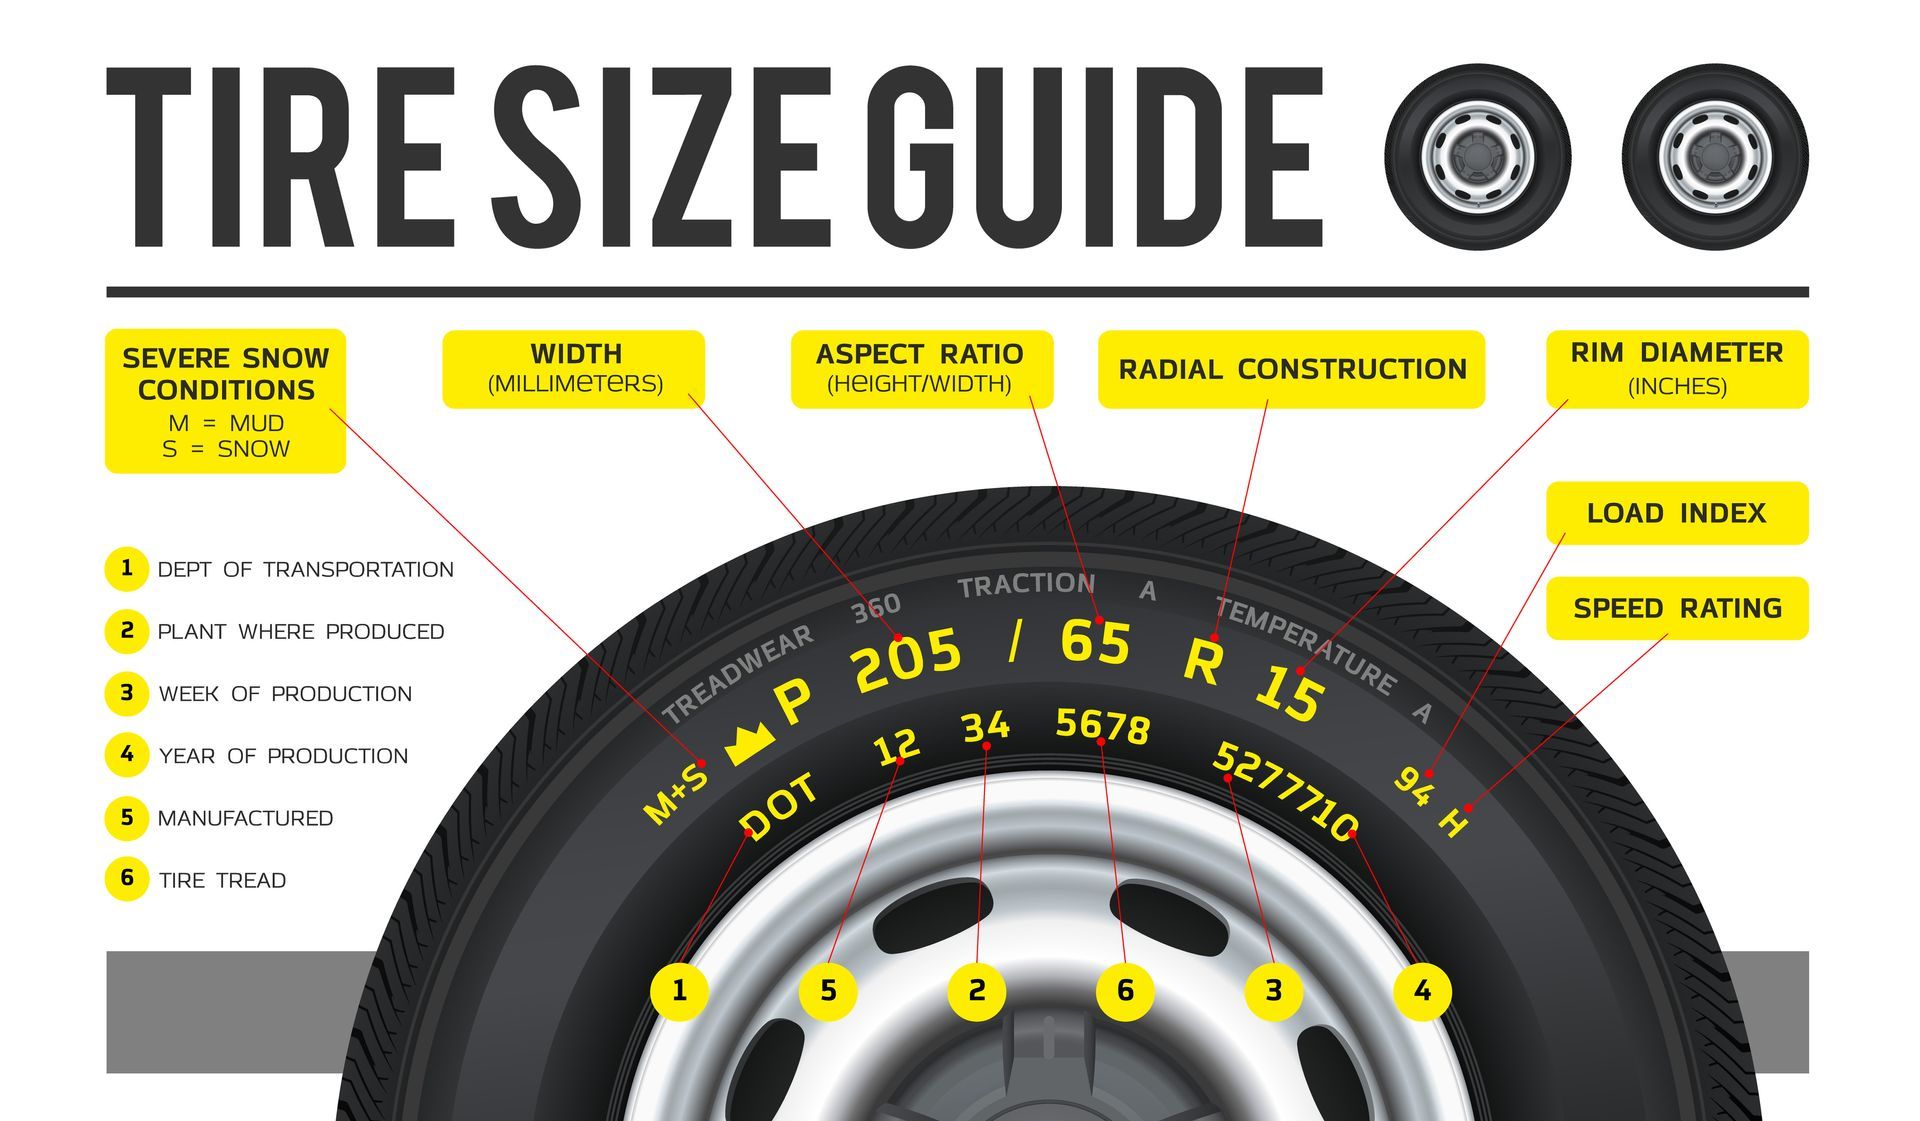 Tire Size Guide at Stutz Auto Service Inc. in McAllen, TX